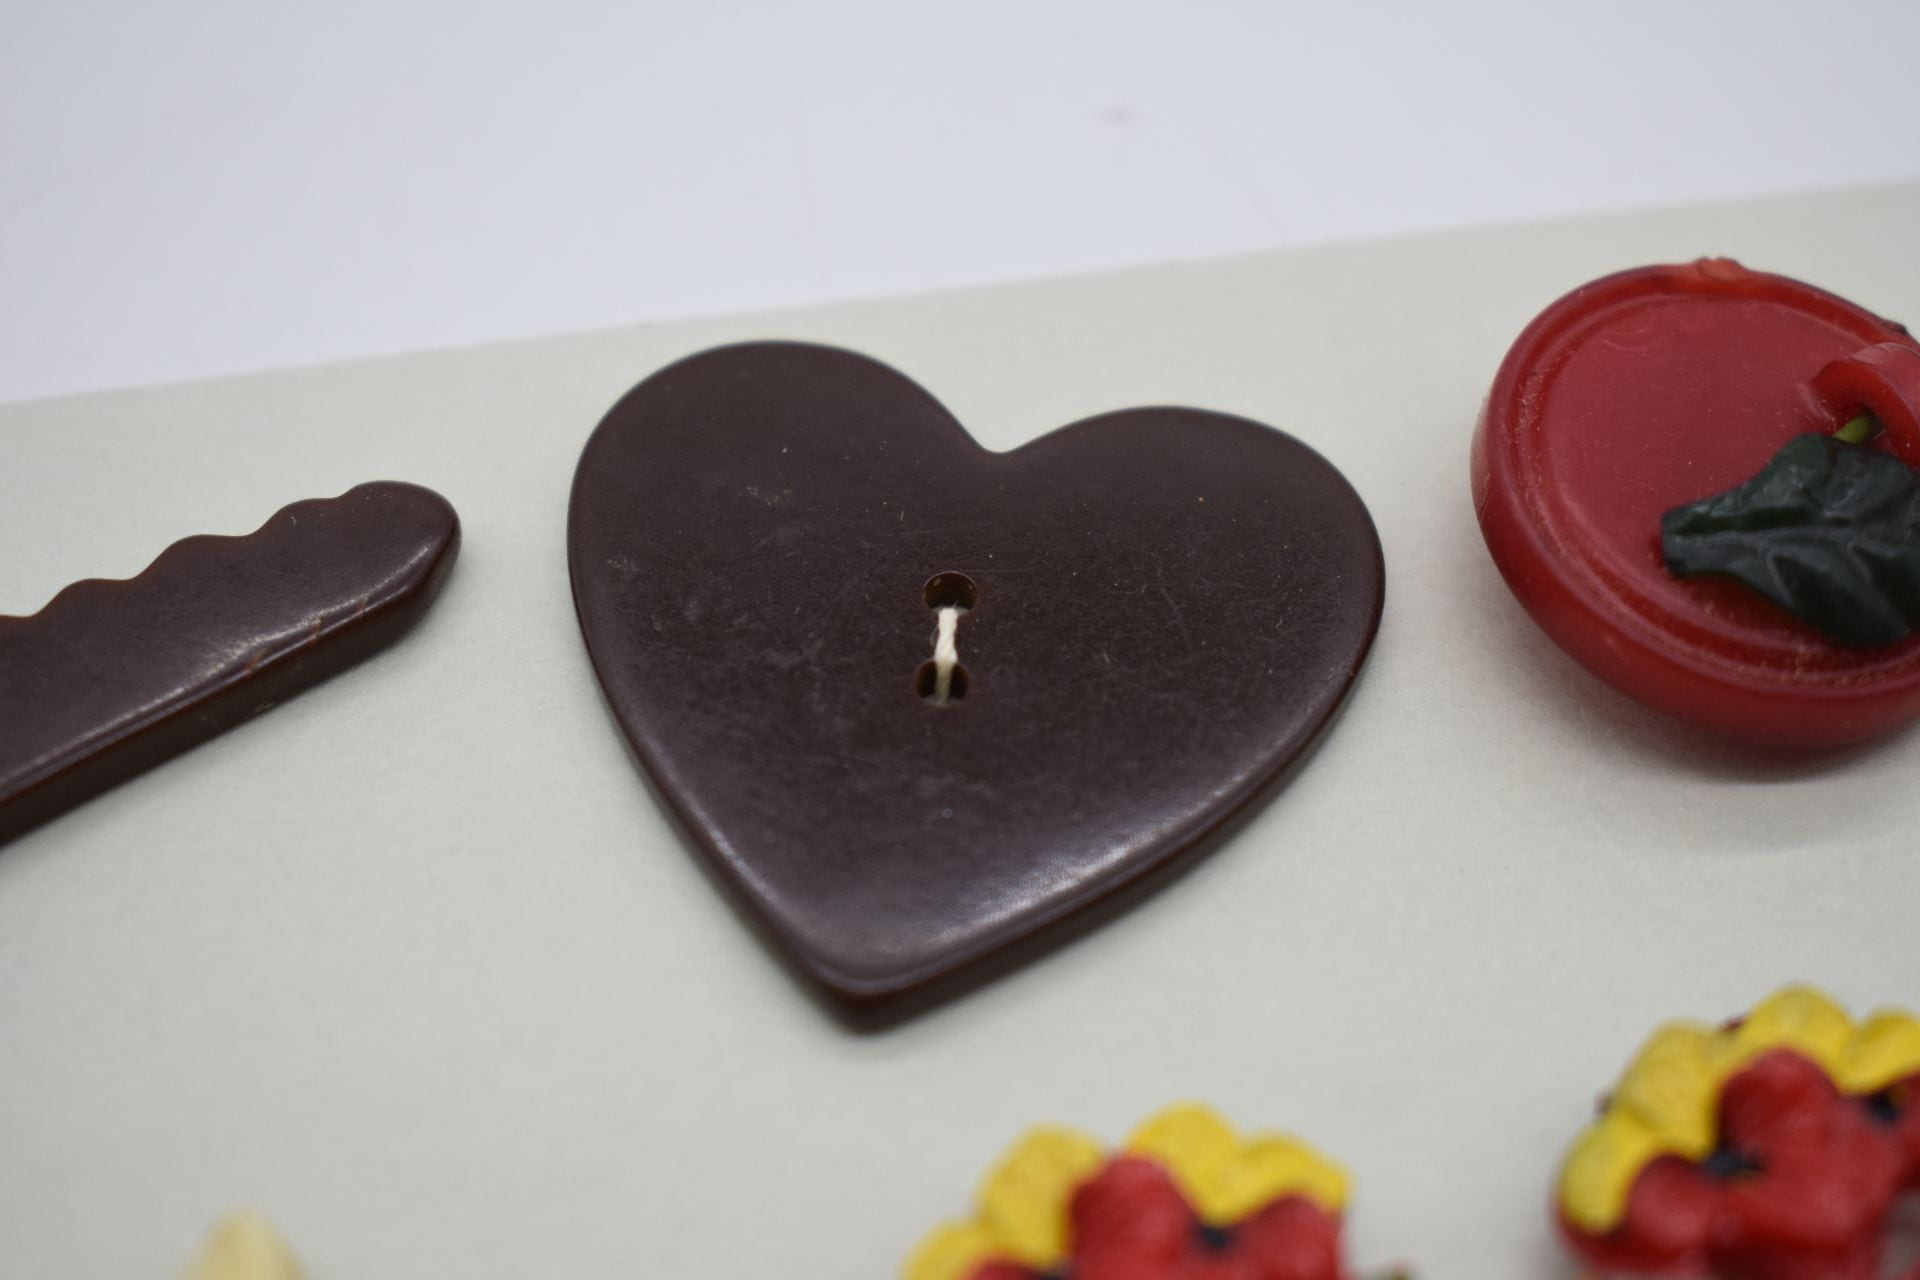 A large brown heart button sewn onto a slip of paper.